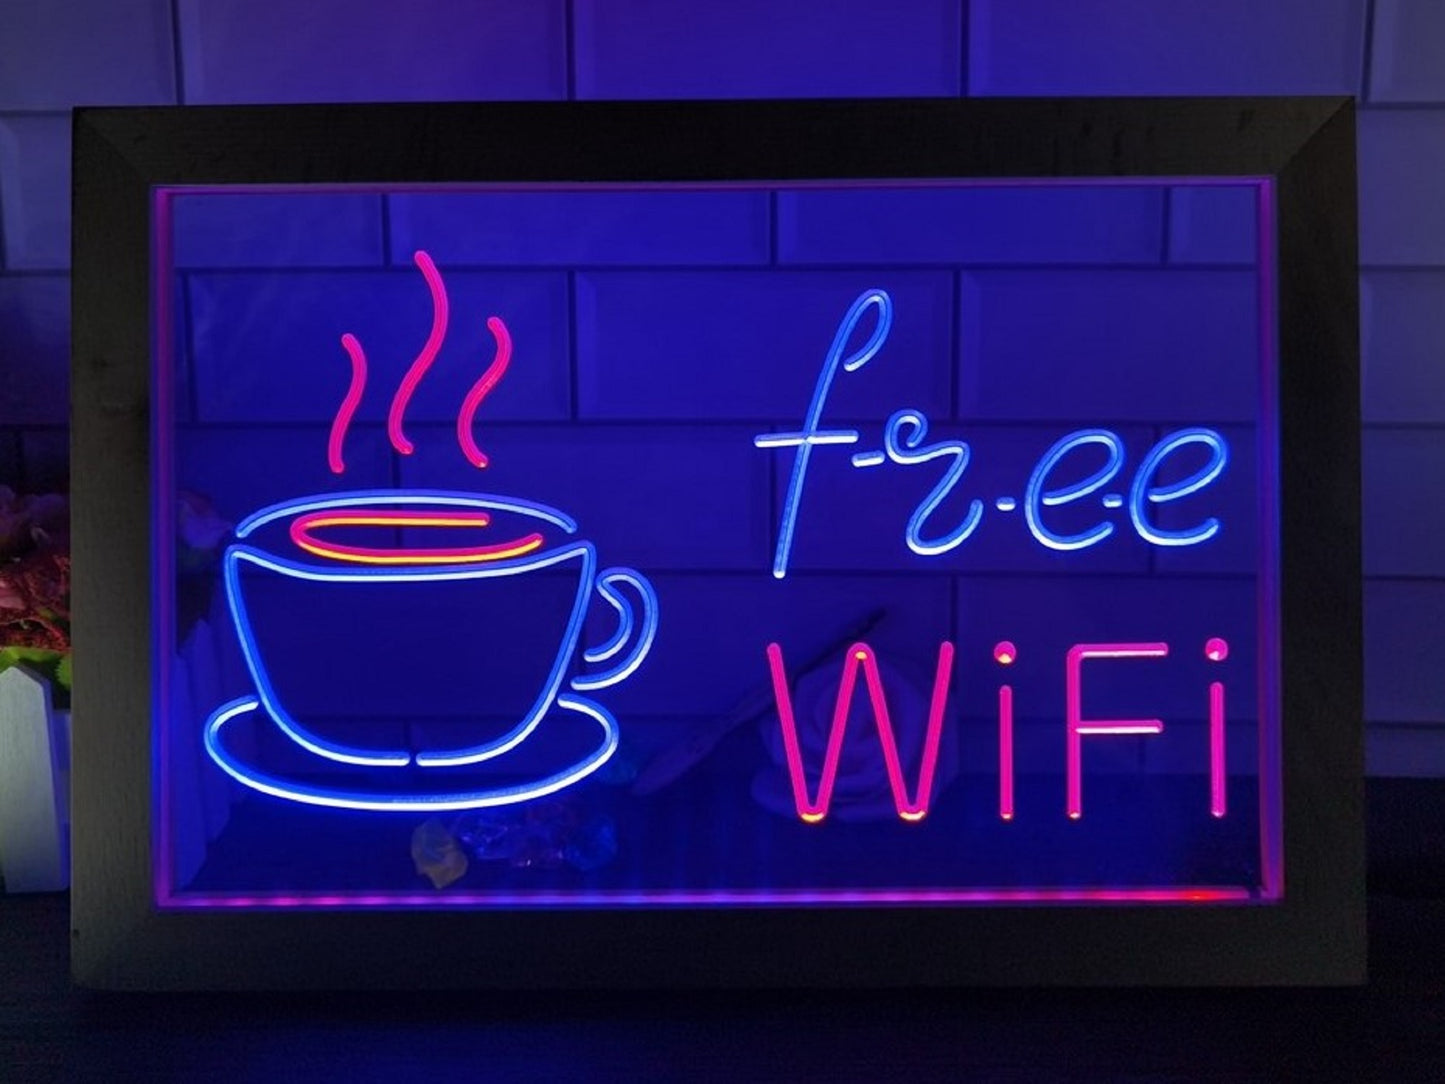 Neon Sign Framed Dual Color Free Wi-Fi Coffee Shop For Wall Desktop Coffee Shop Decor